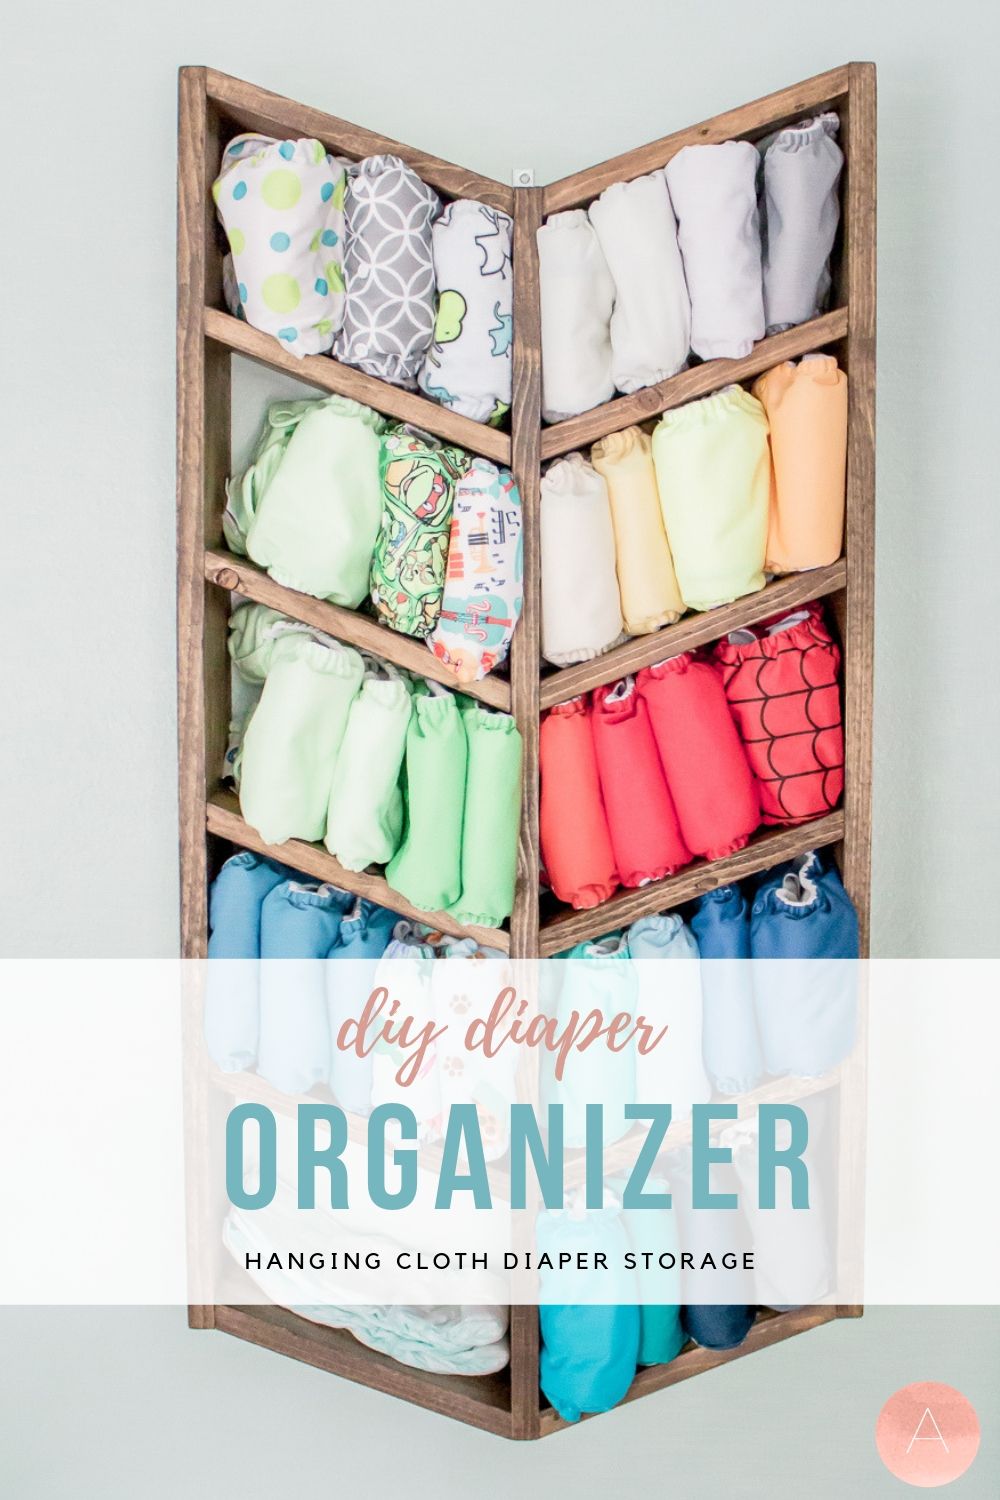 Love using cloth diapers, but hate how much space they take up? Make hanging storage for your cloth diapers! This DIY solution is unique, adorable, versatile, and super practical. Find out how to make it with this free pattern! #clothdiapers #babynursery #nurserydesign #homestorage #organized #diykids